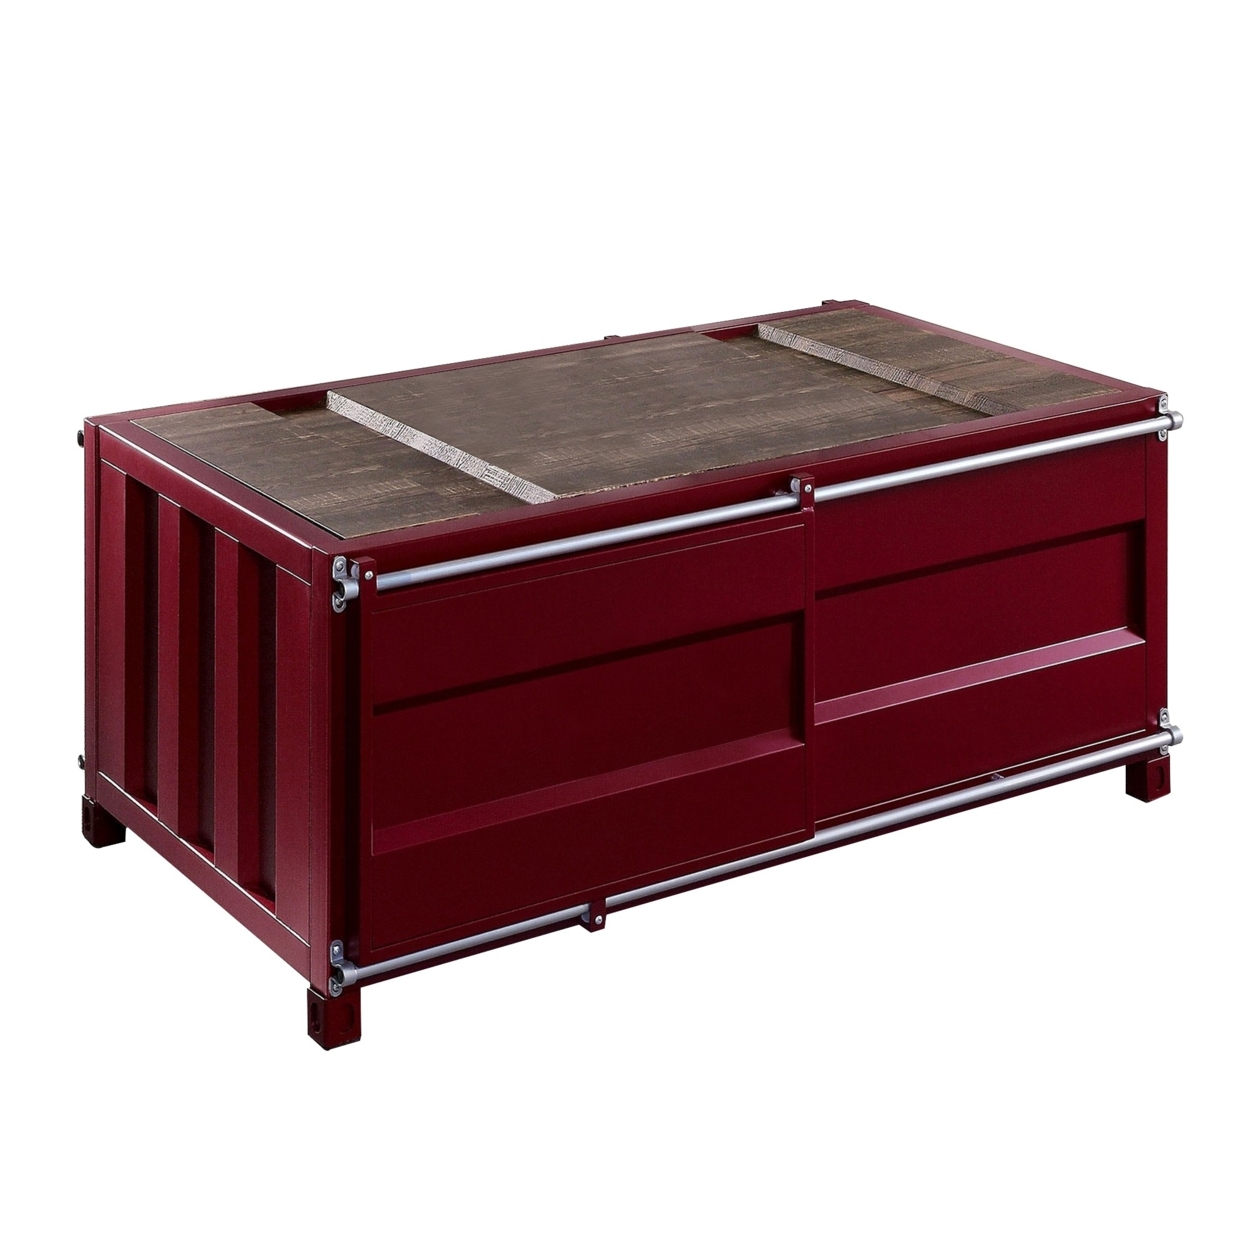 Container Style Coffee Table With Sliding Doors, Red- Saltoro Sherpi